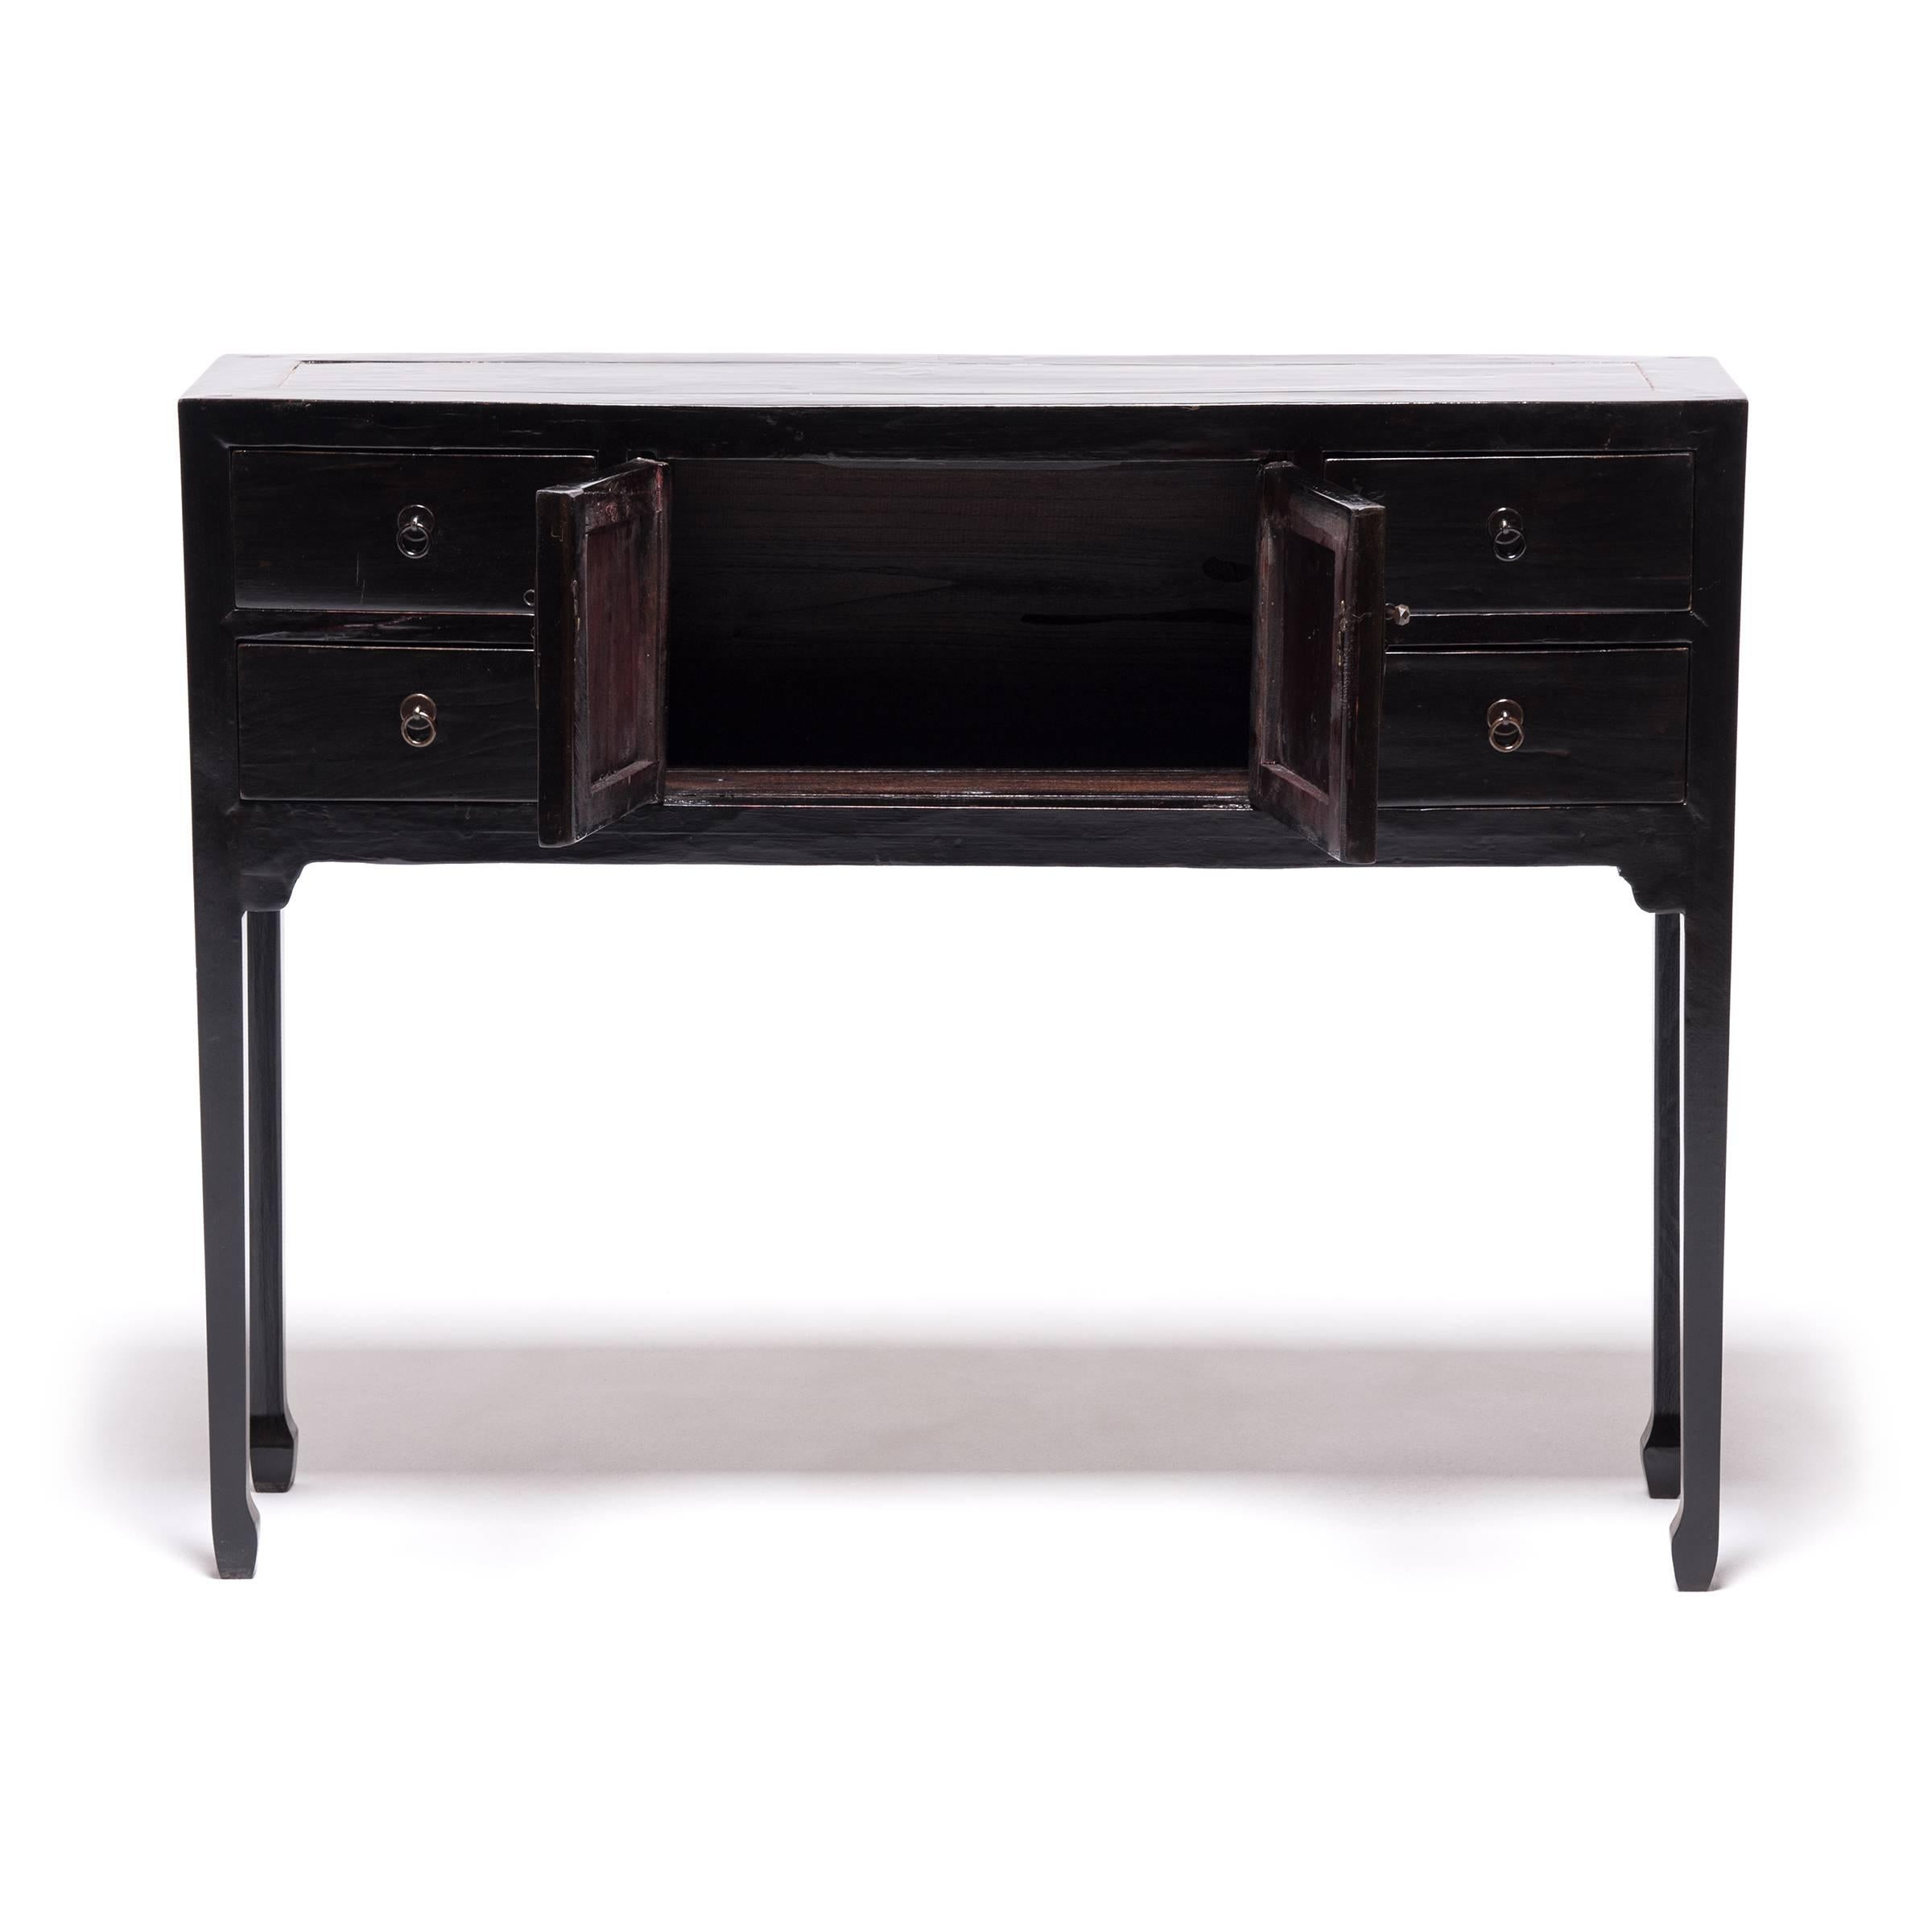 This 19th century altar coffer keeps with the style of Ming-dynasty furniture through its clean lines and minimal ornamentation. Originally used beside a kang platform bed in a woman's sleeping quarters, our carpenters - skilled in traditional